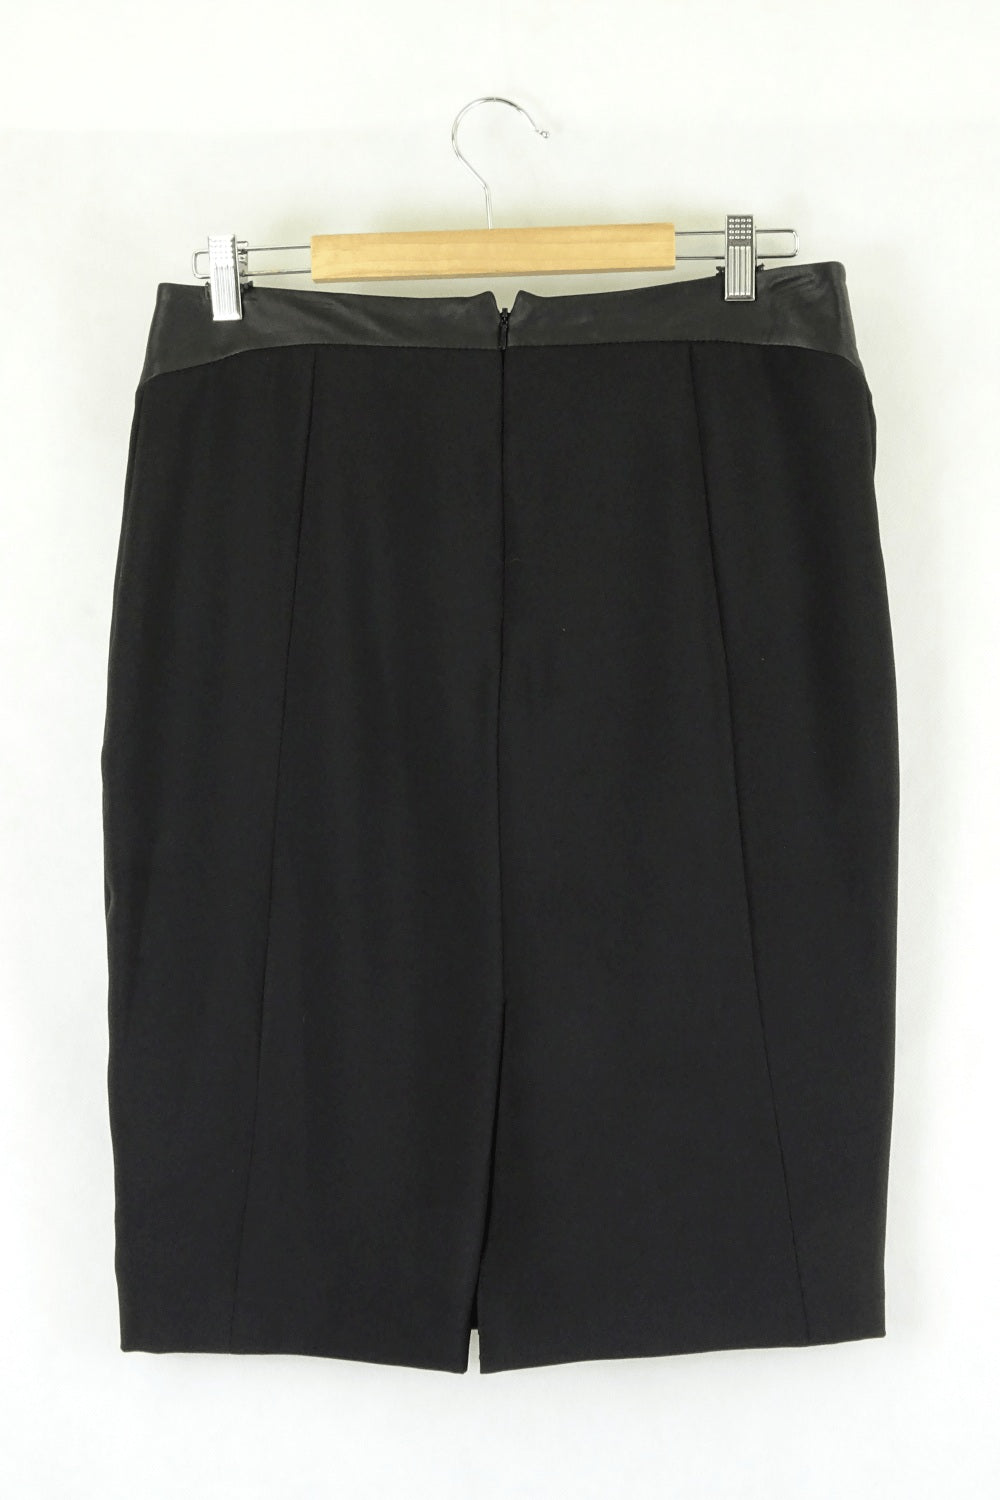 REISS Black Faux Leather Skirt 12